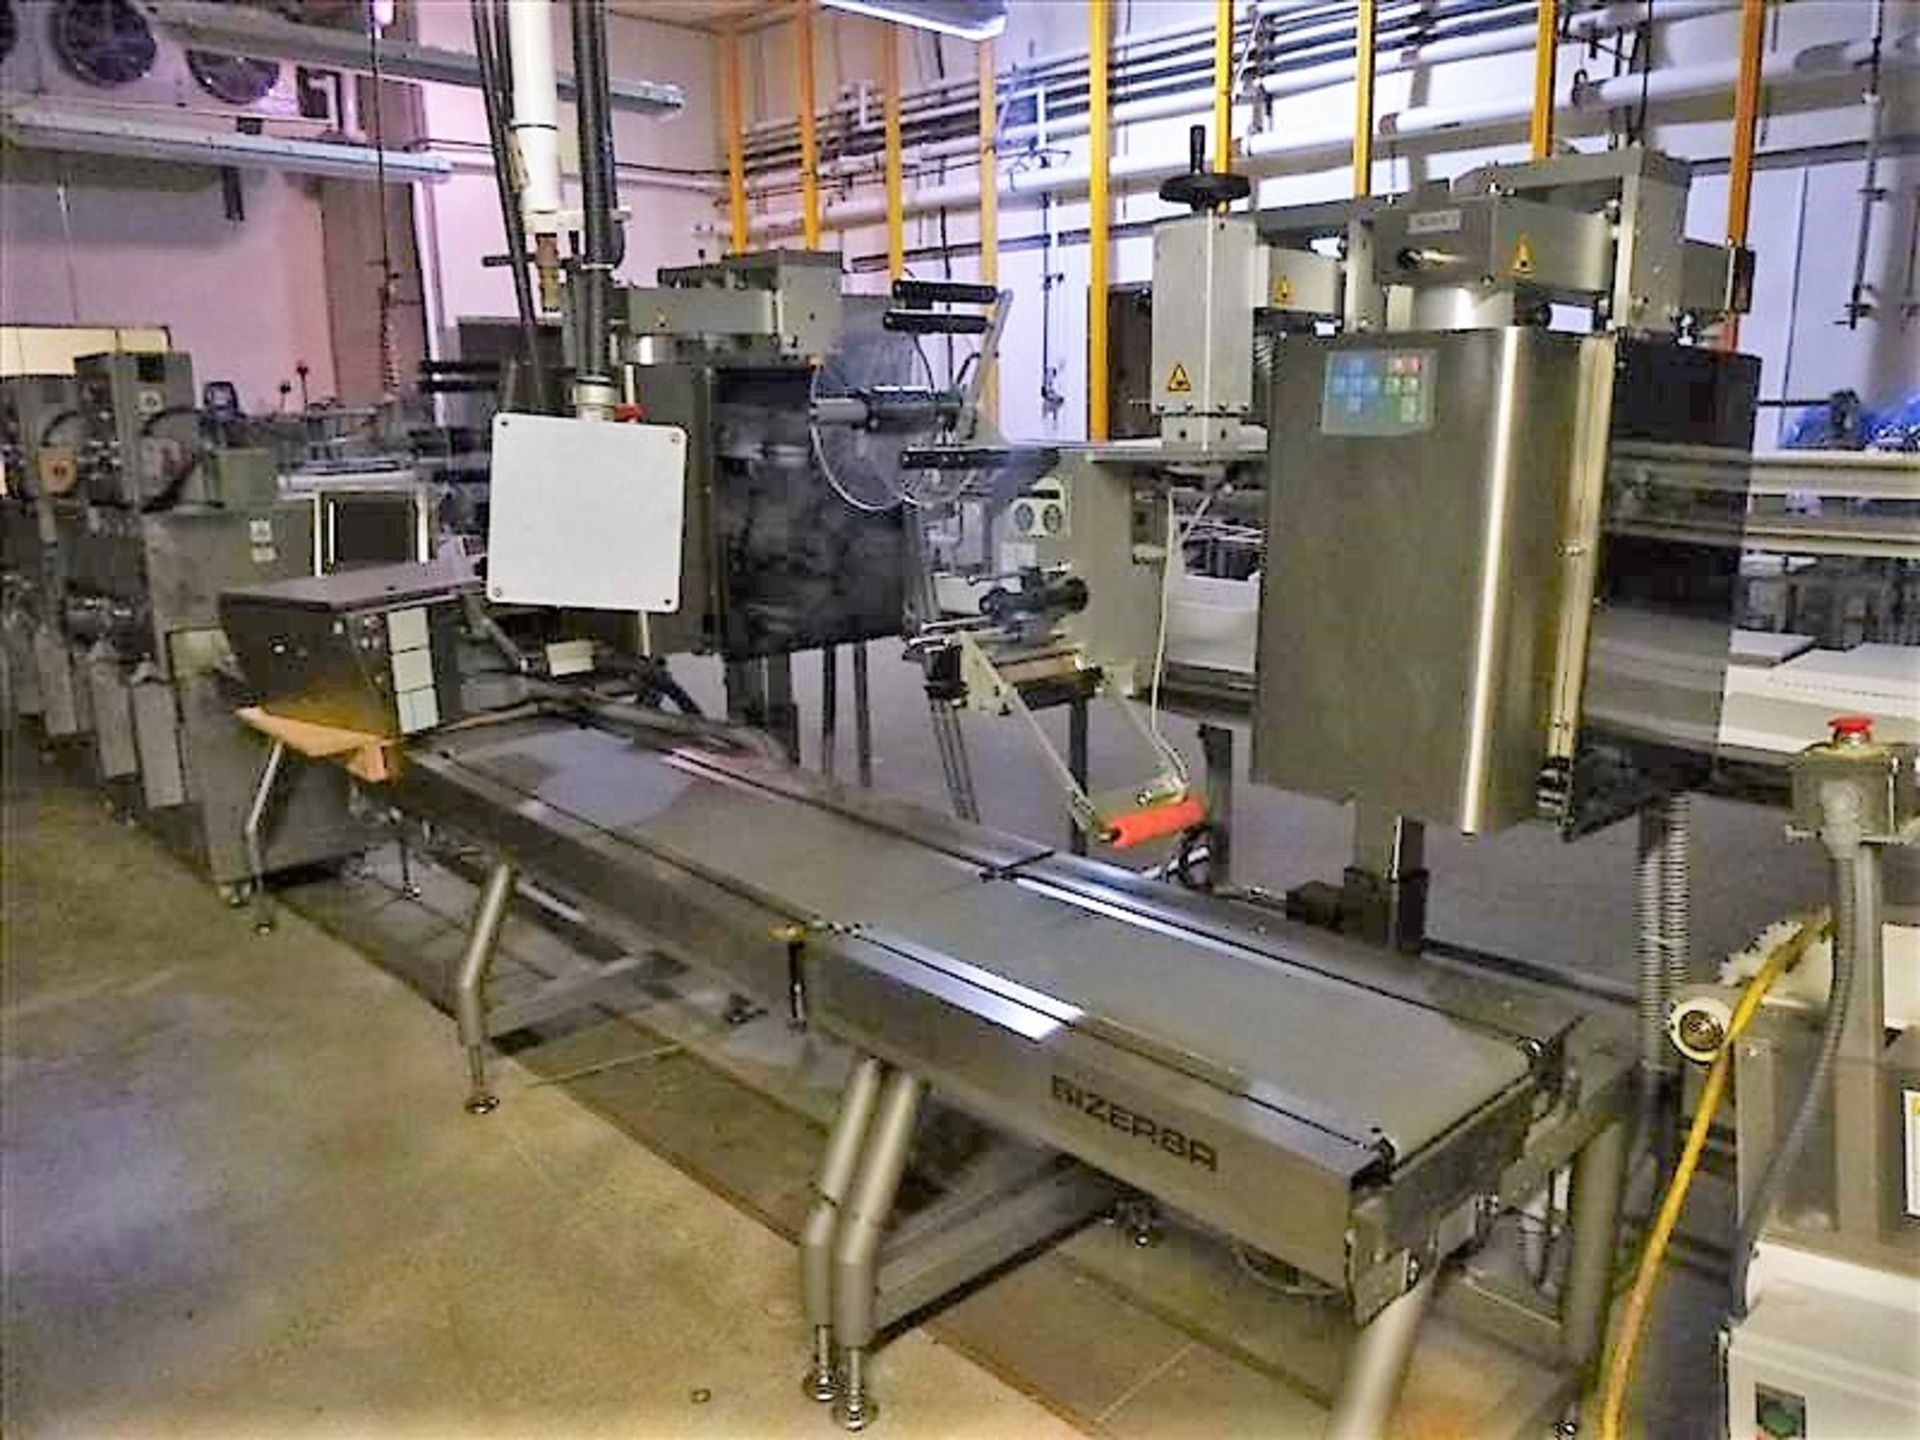 Bizerba s/s automatic weigh, price, labeling system, model GLM-I, 150, ser. no. 10952826, approx. - Image 2 of 3